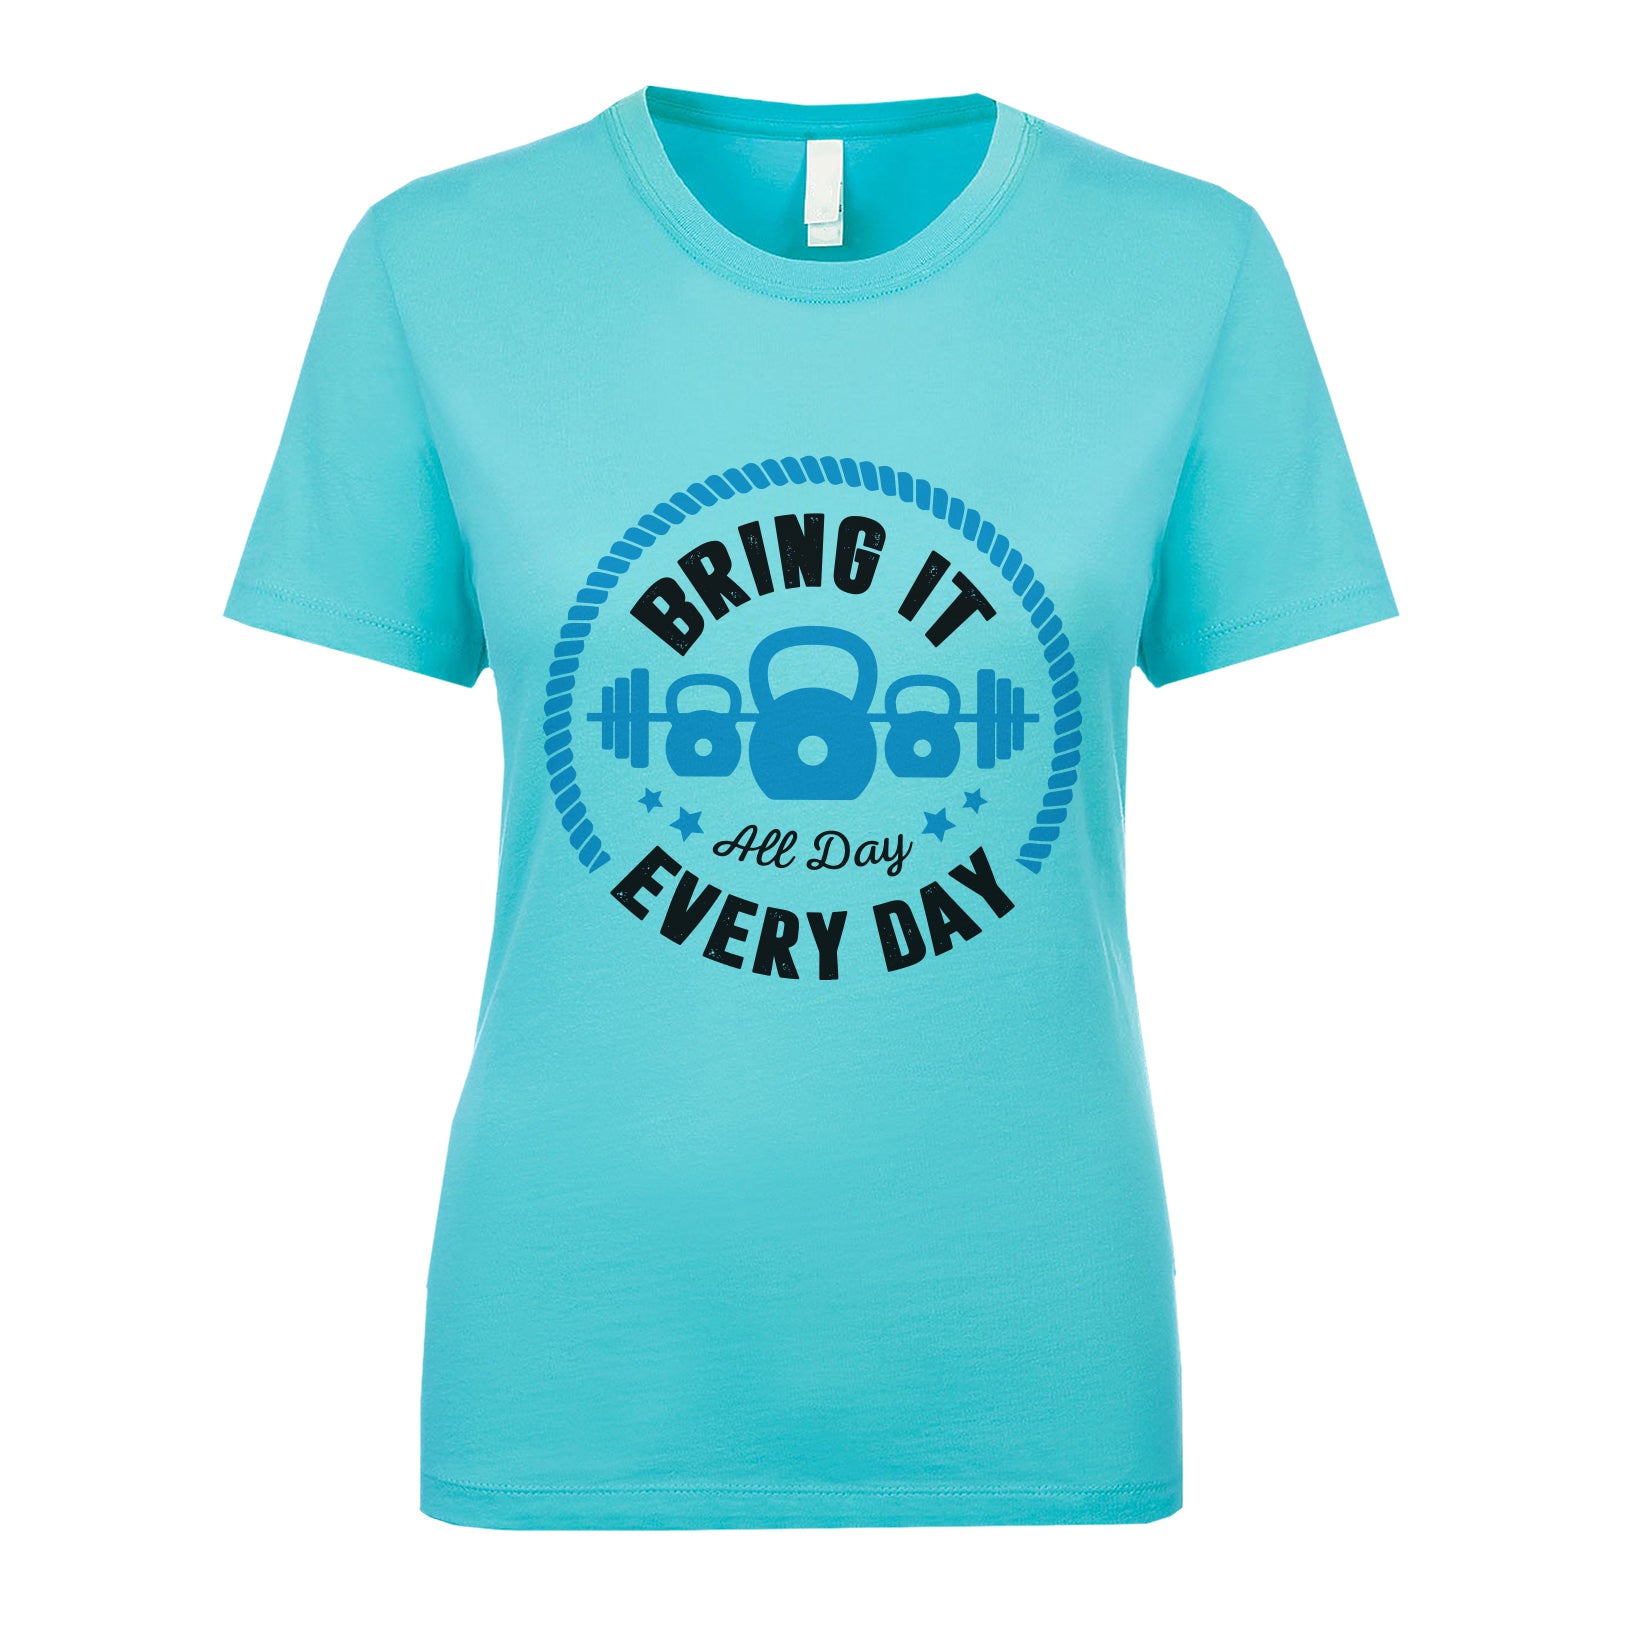 Bring It All Day, Every day Women's Shirt